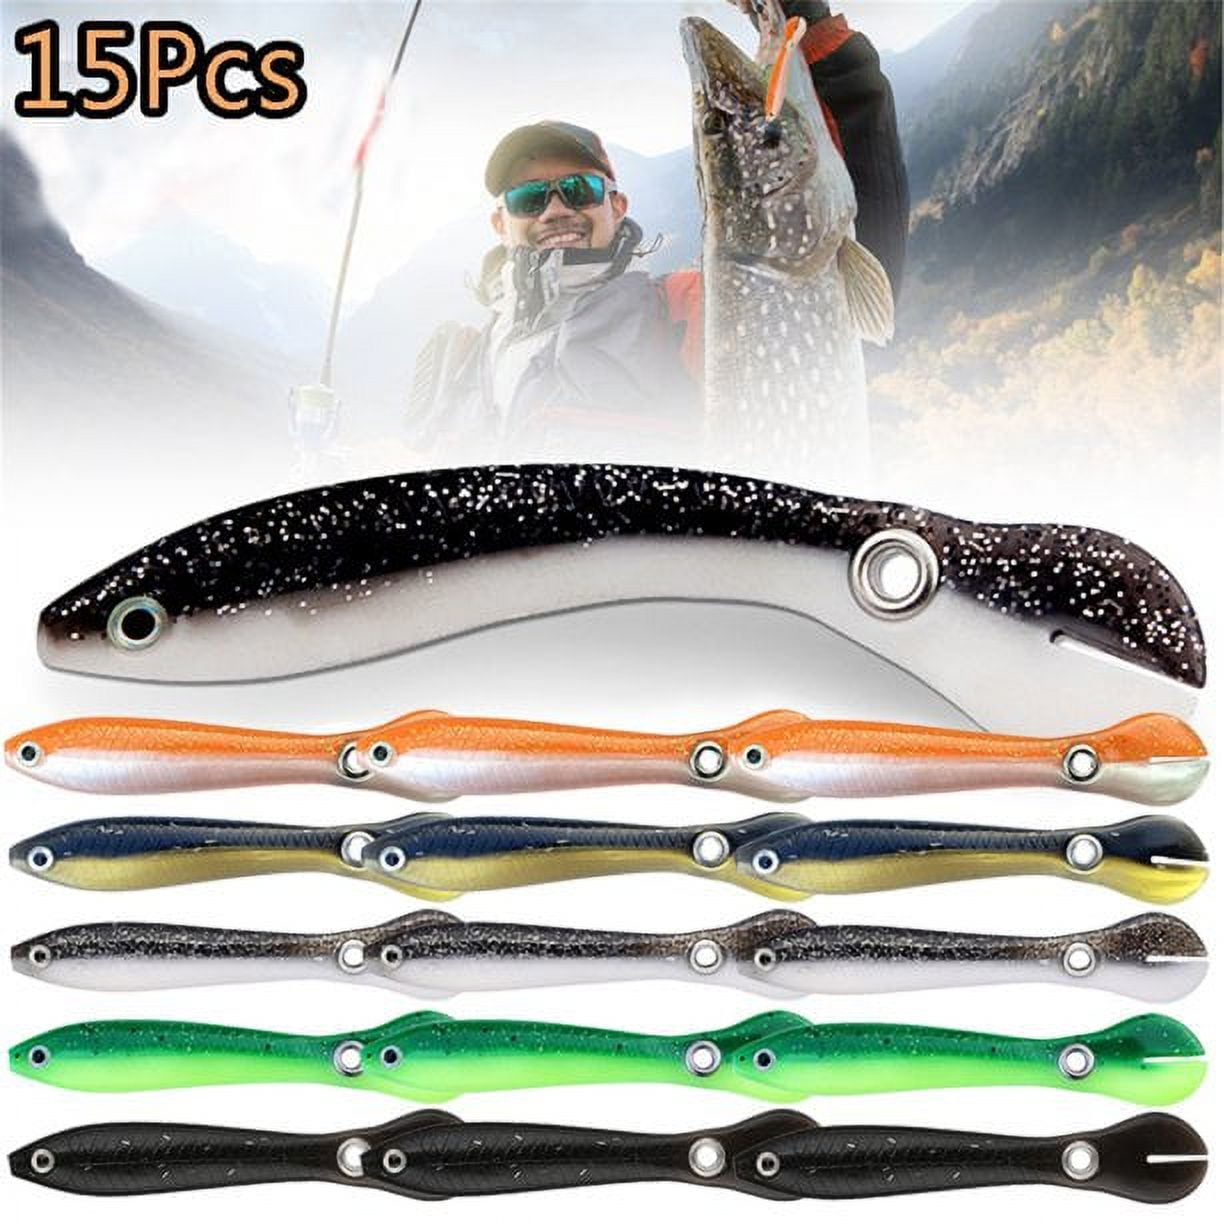 Soft Bionic Fishing Lure,Bionic Fishing Lure for Saltwater & Freshwater, Creative Realistic, Size: 10 cm / 3.93 Inches, Brown